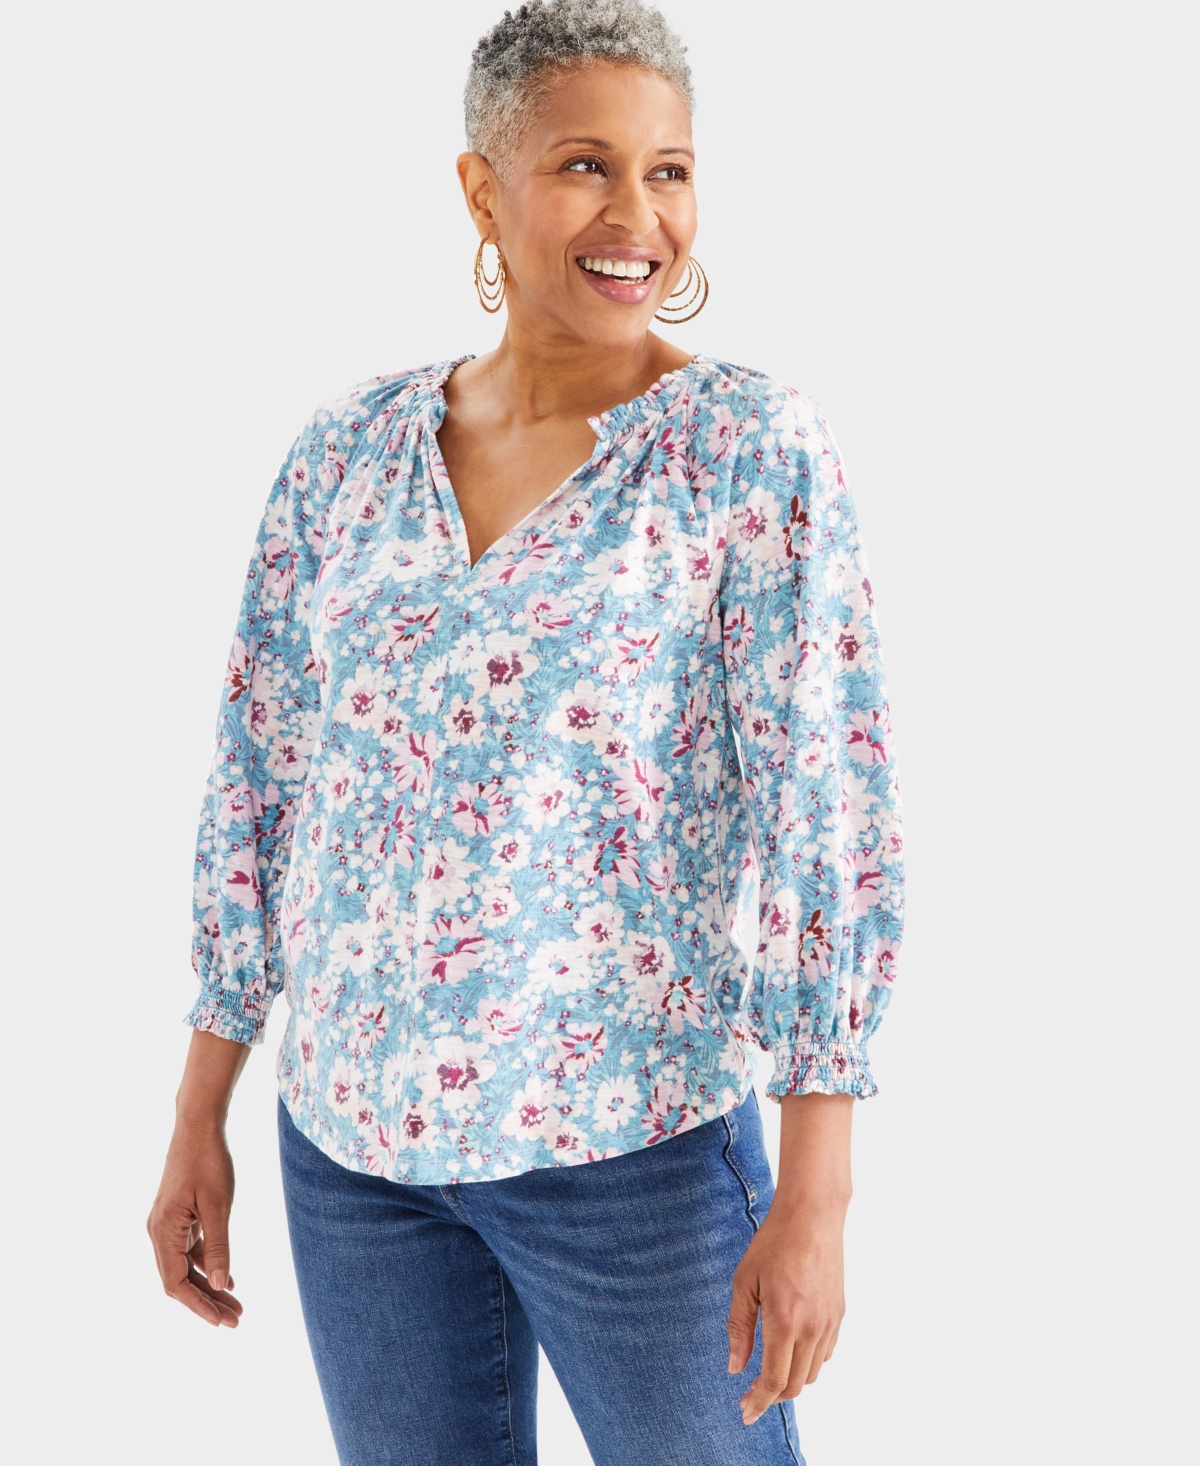 Women's Printed Split Neck Ruffle Trim Long-Sleeve Knit Top, Created for Macy's - Teal Floral